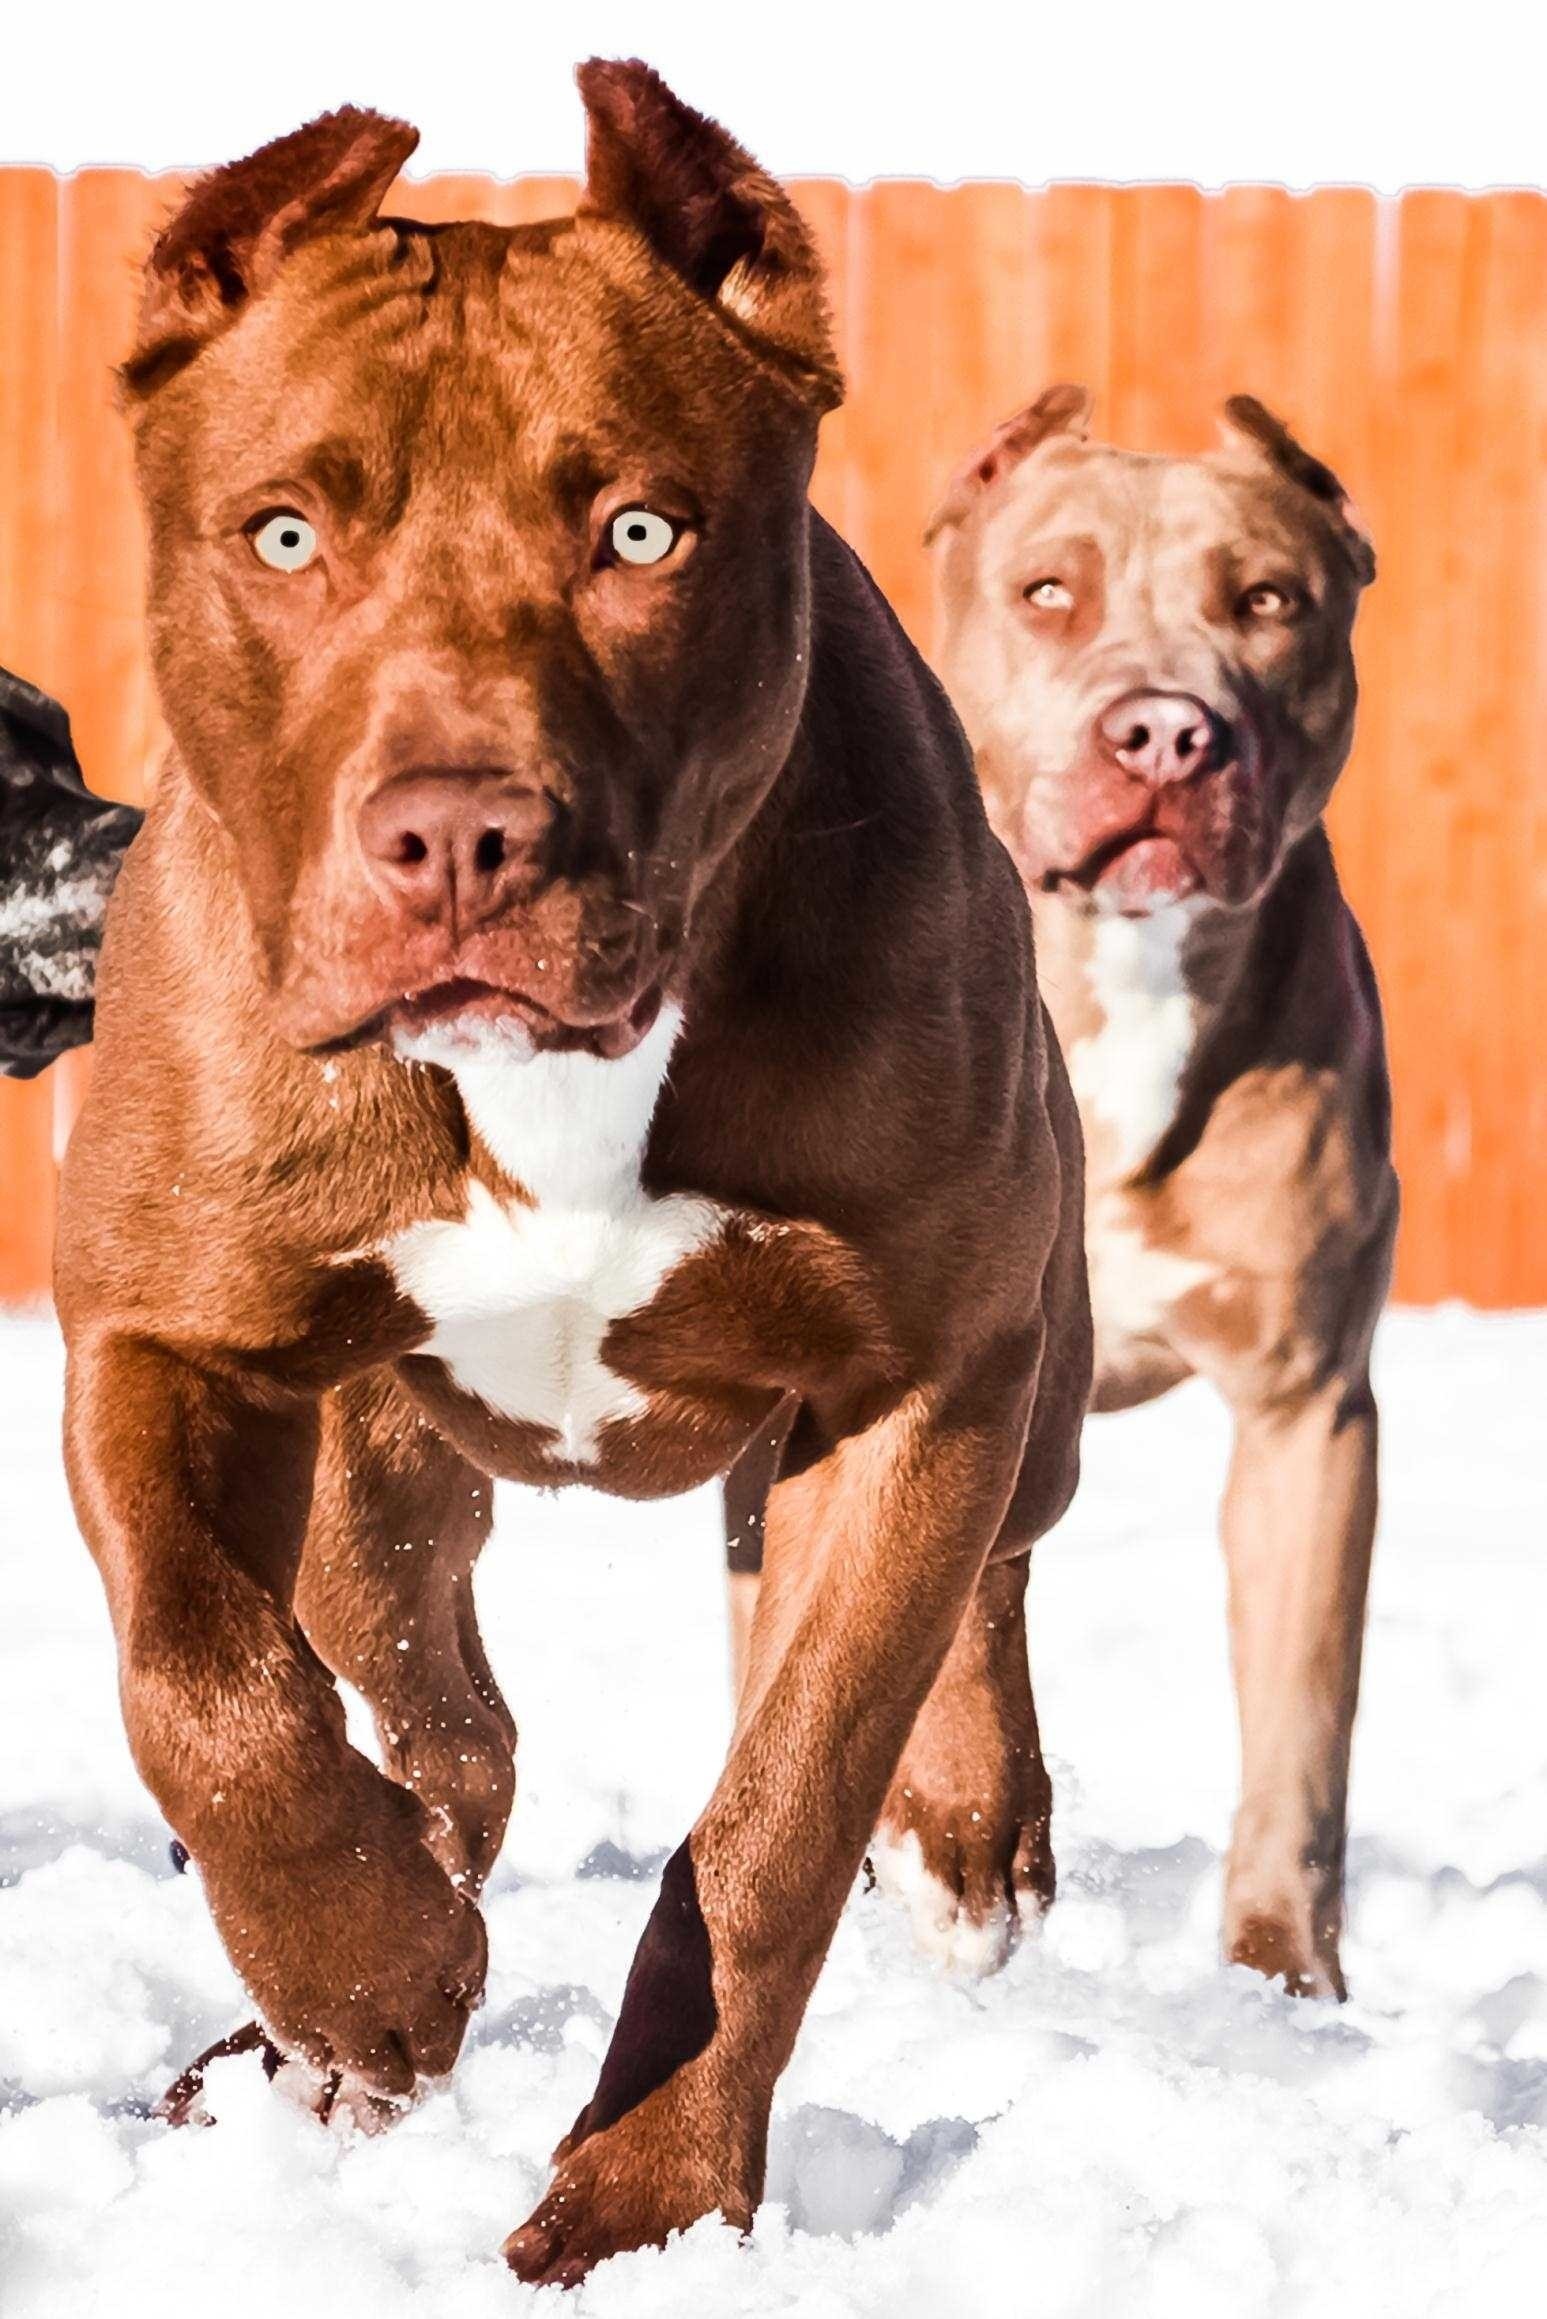 1547x2319 Title : red nose pitbull wallpaper (34+ images) Dimension : 1547 x 2319.  File Type : JPG/JPEG